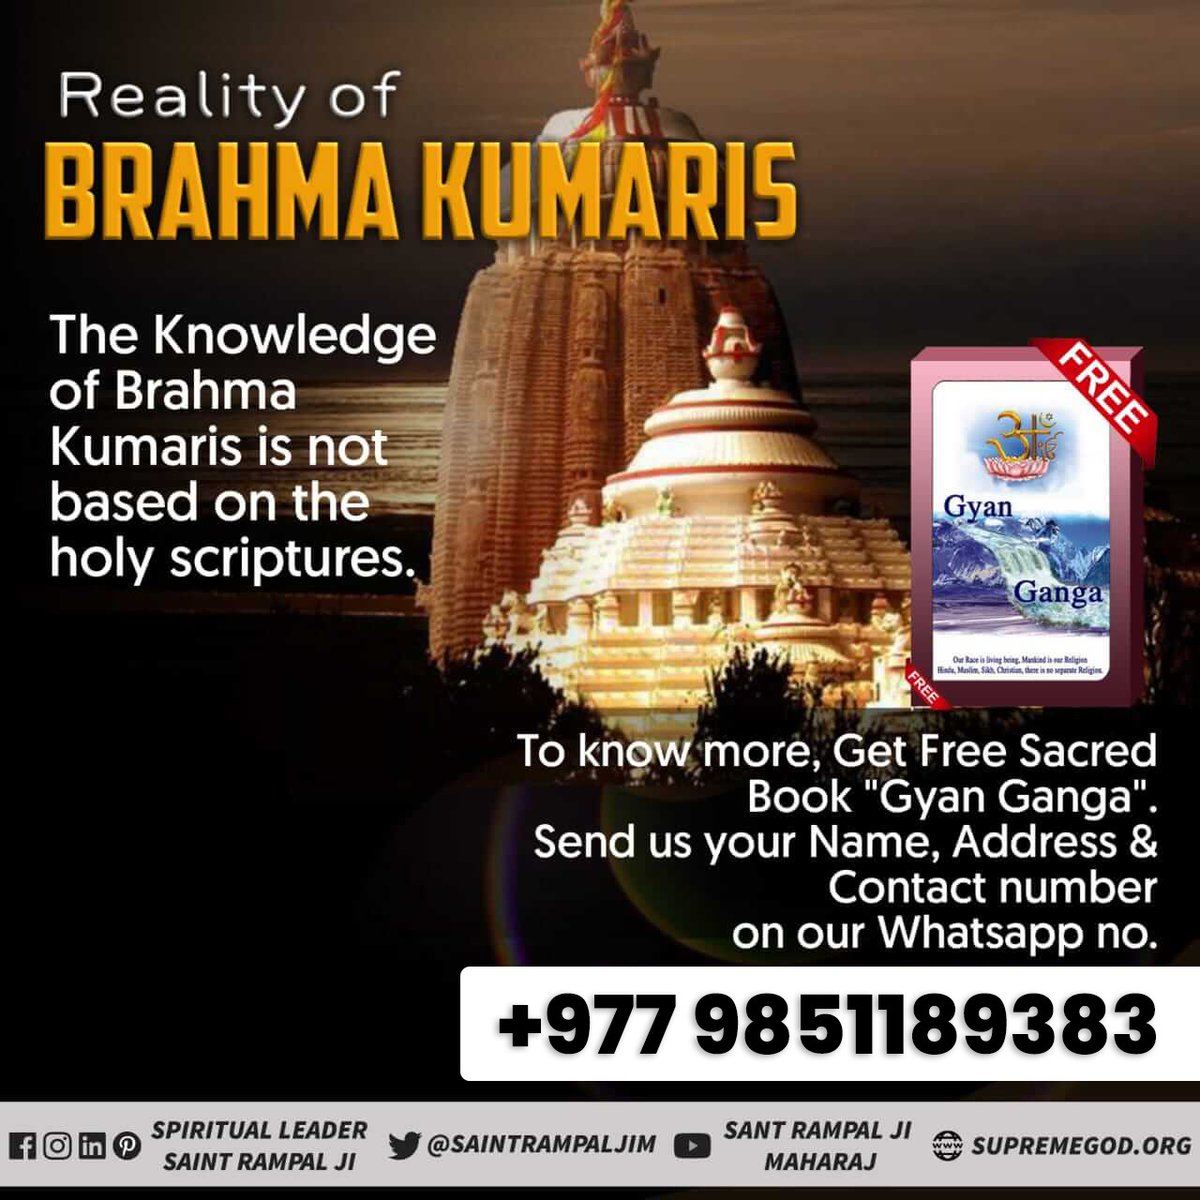 #Reality_Of_BrahmaKumari_Panth
Reality of BRAHMA KUMARIS

The Knowledge of Brahma Kumaris is not based on the holy scriptures.

To know more, Get Free Sacred Book 'Gyan Ganga'.